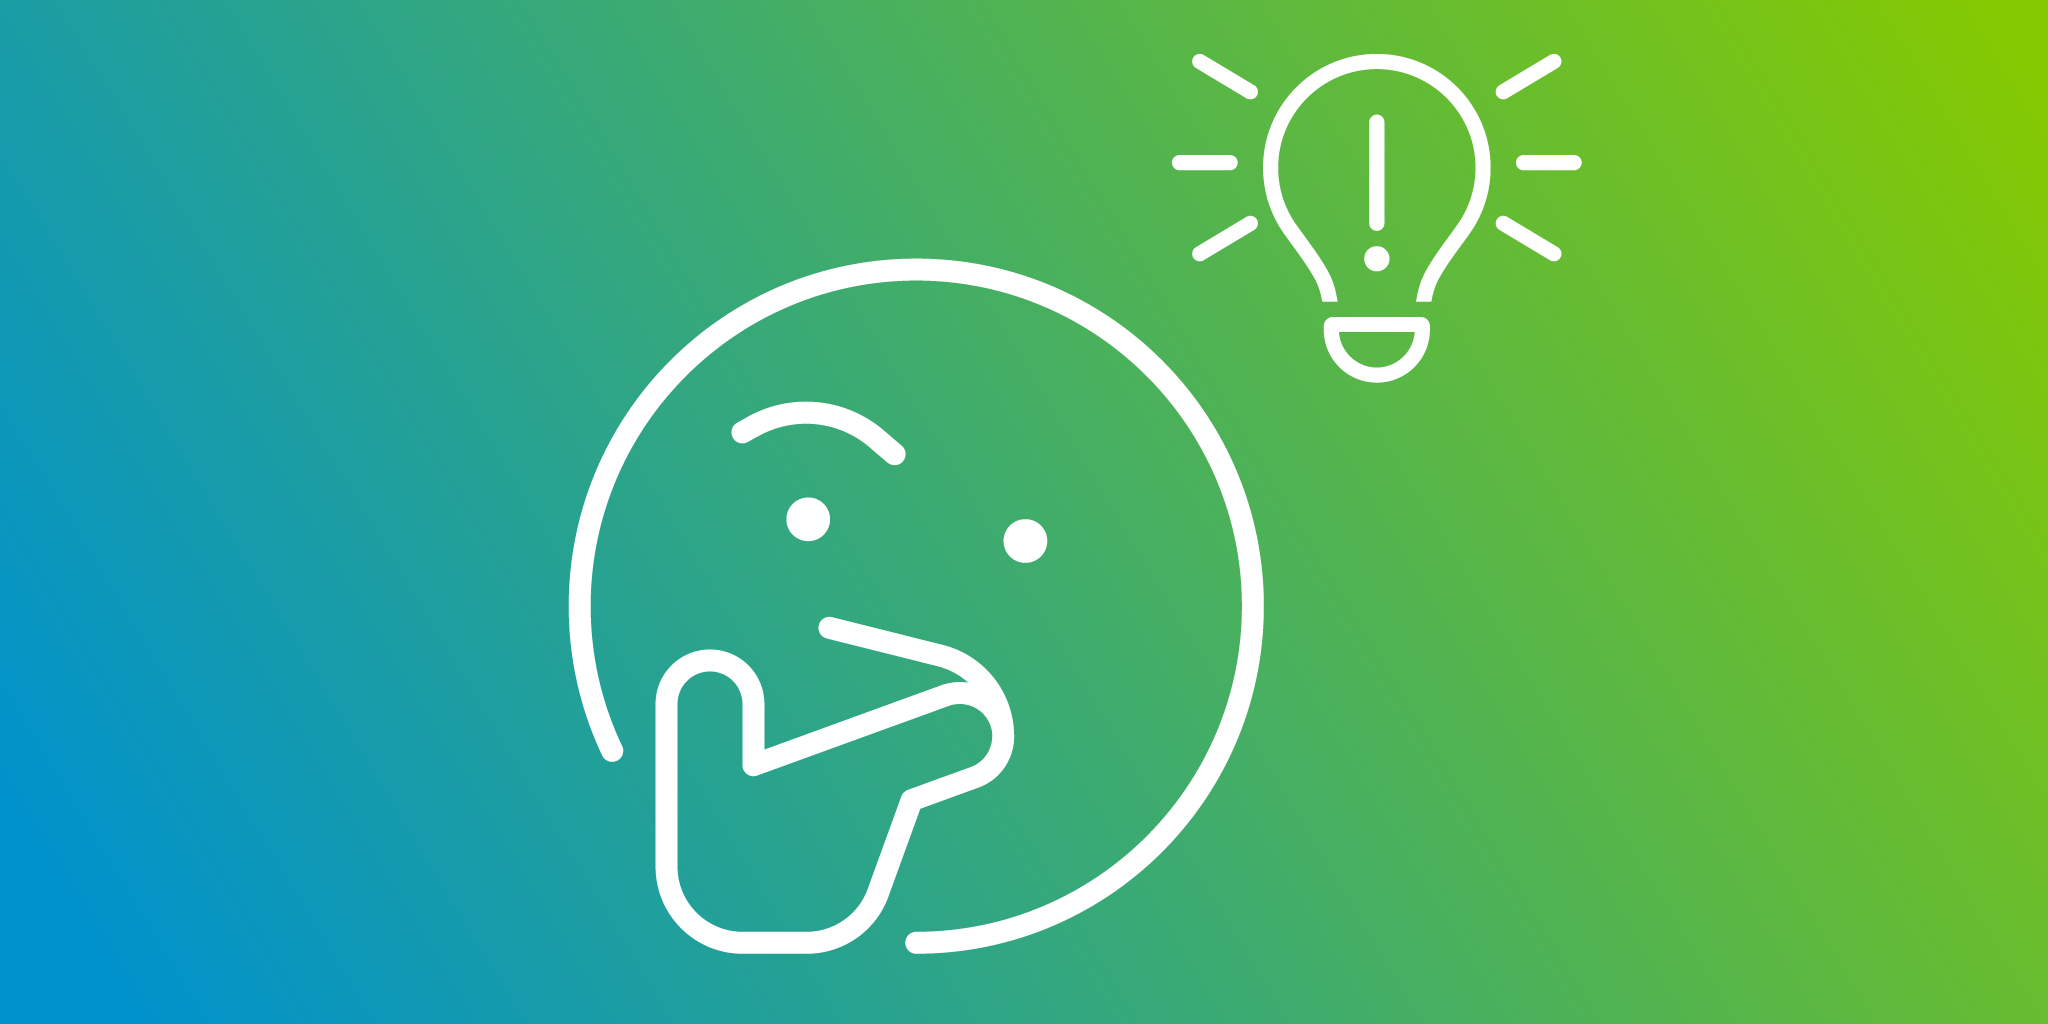 green and blue image with lightbulb and questioning face